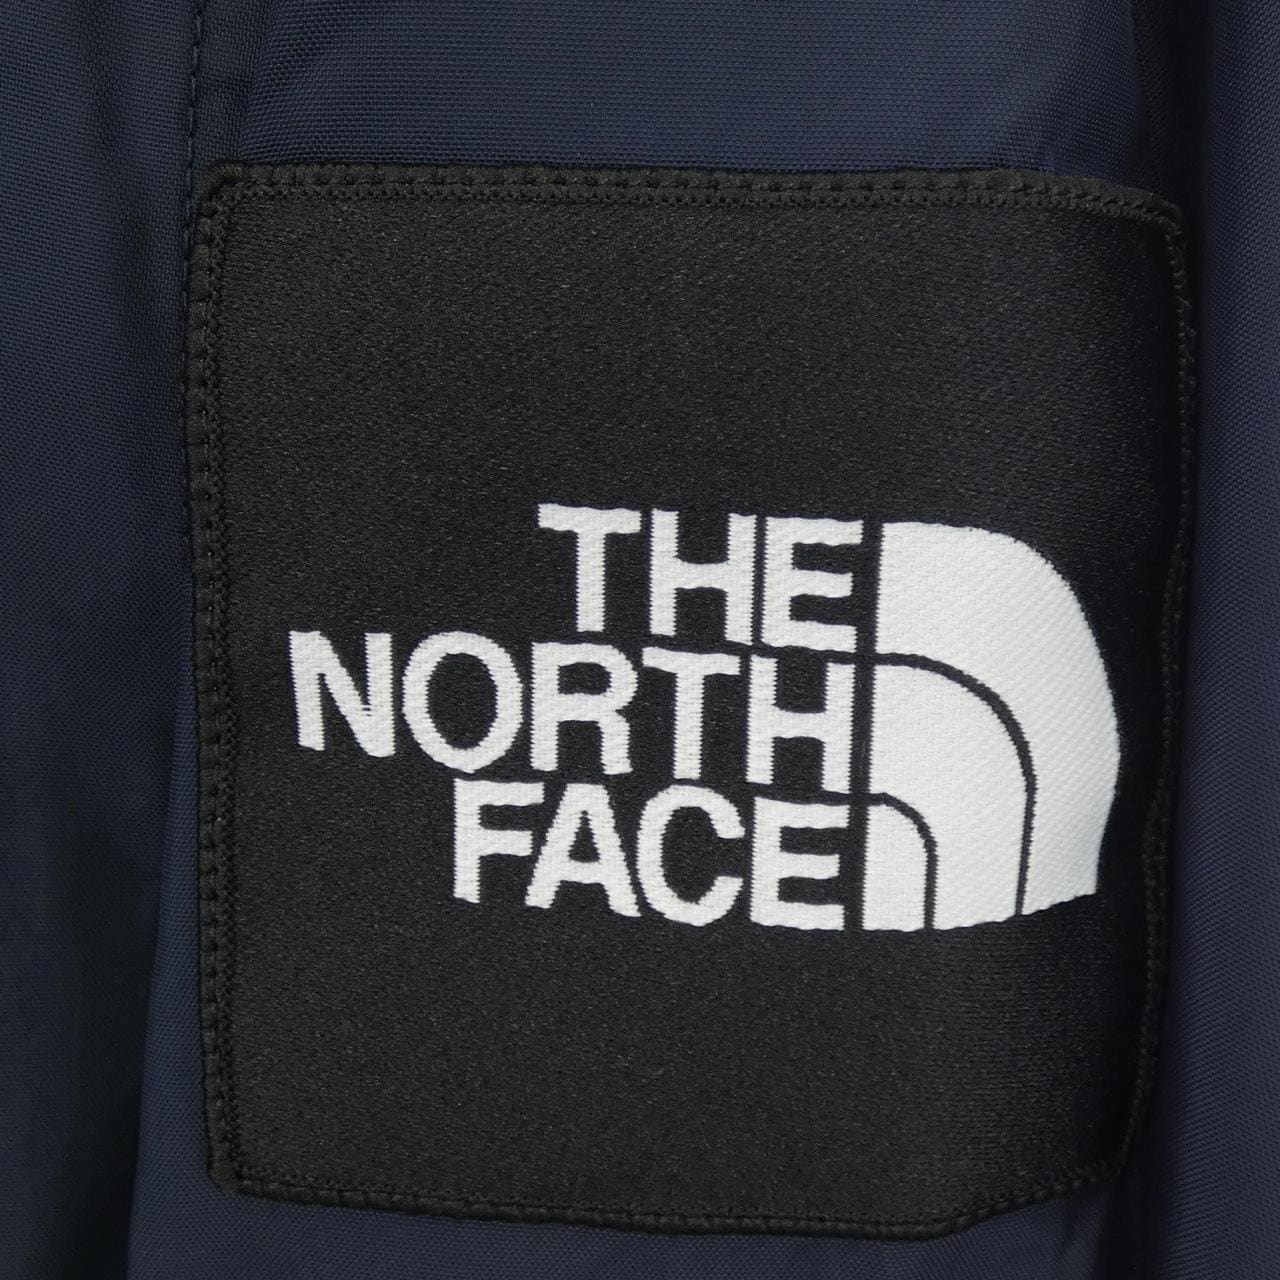 The North Face THE NORTH FACE jacket